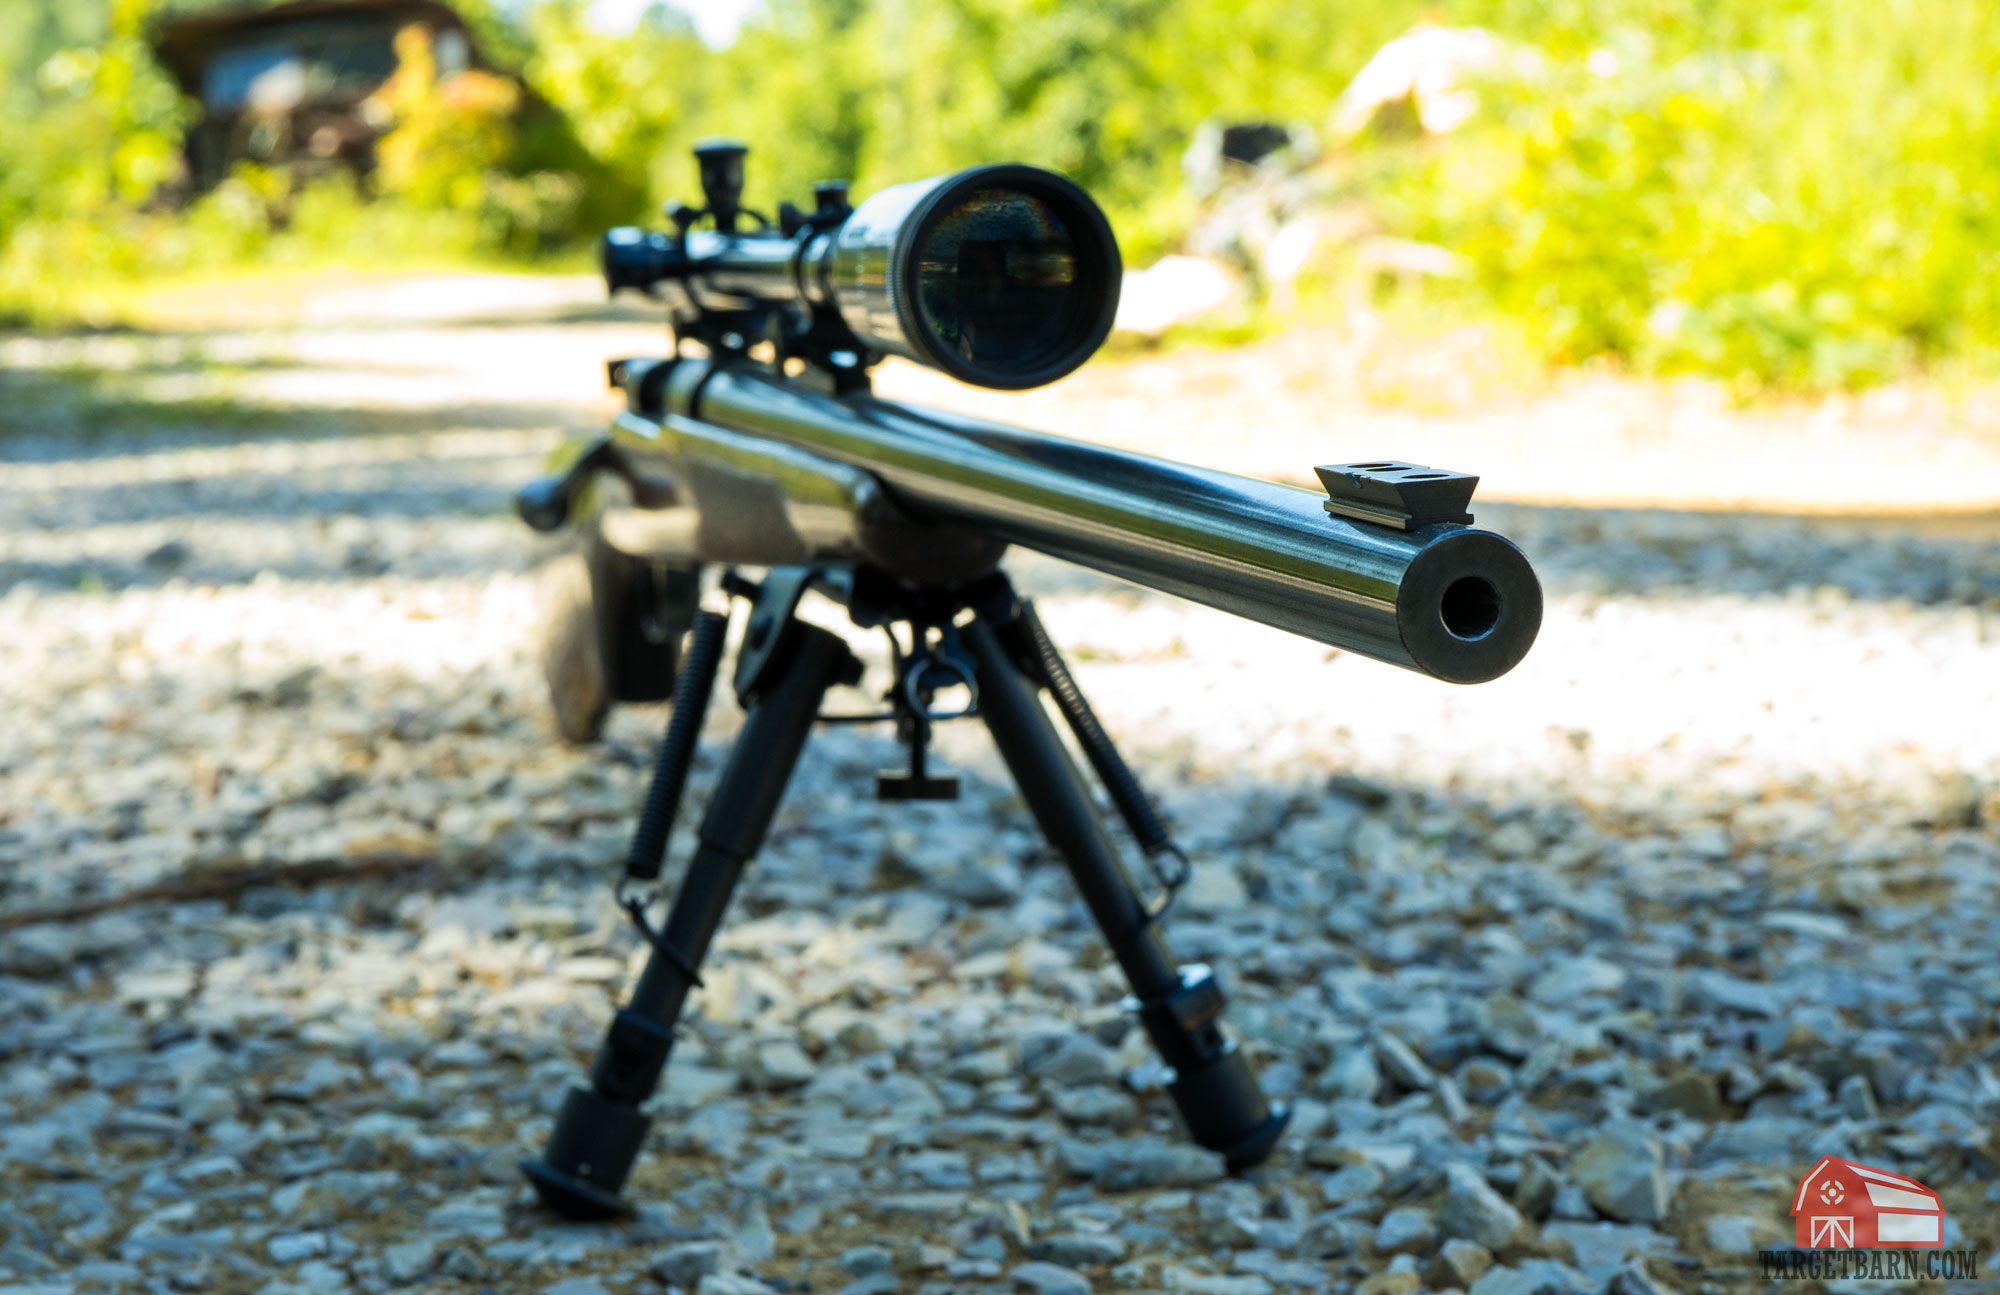 a bull barrel on a hunting rifle helps resist vibration, reduces recoil, and is more accurate